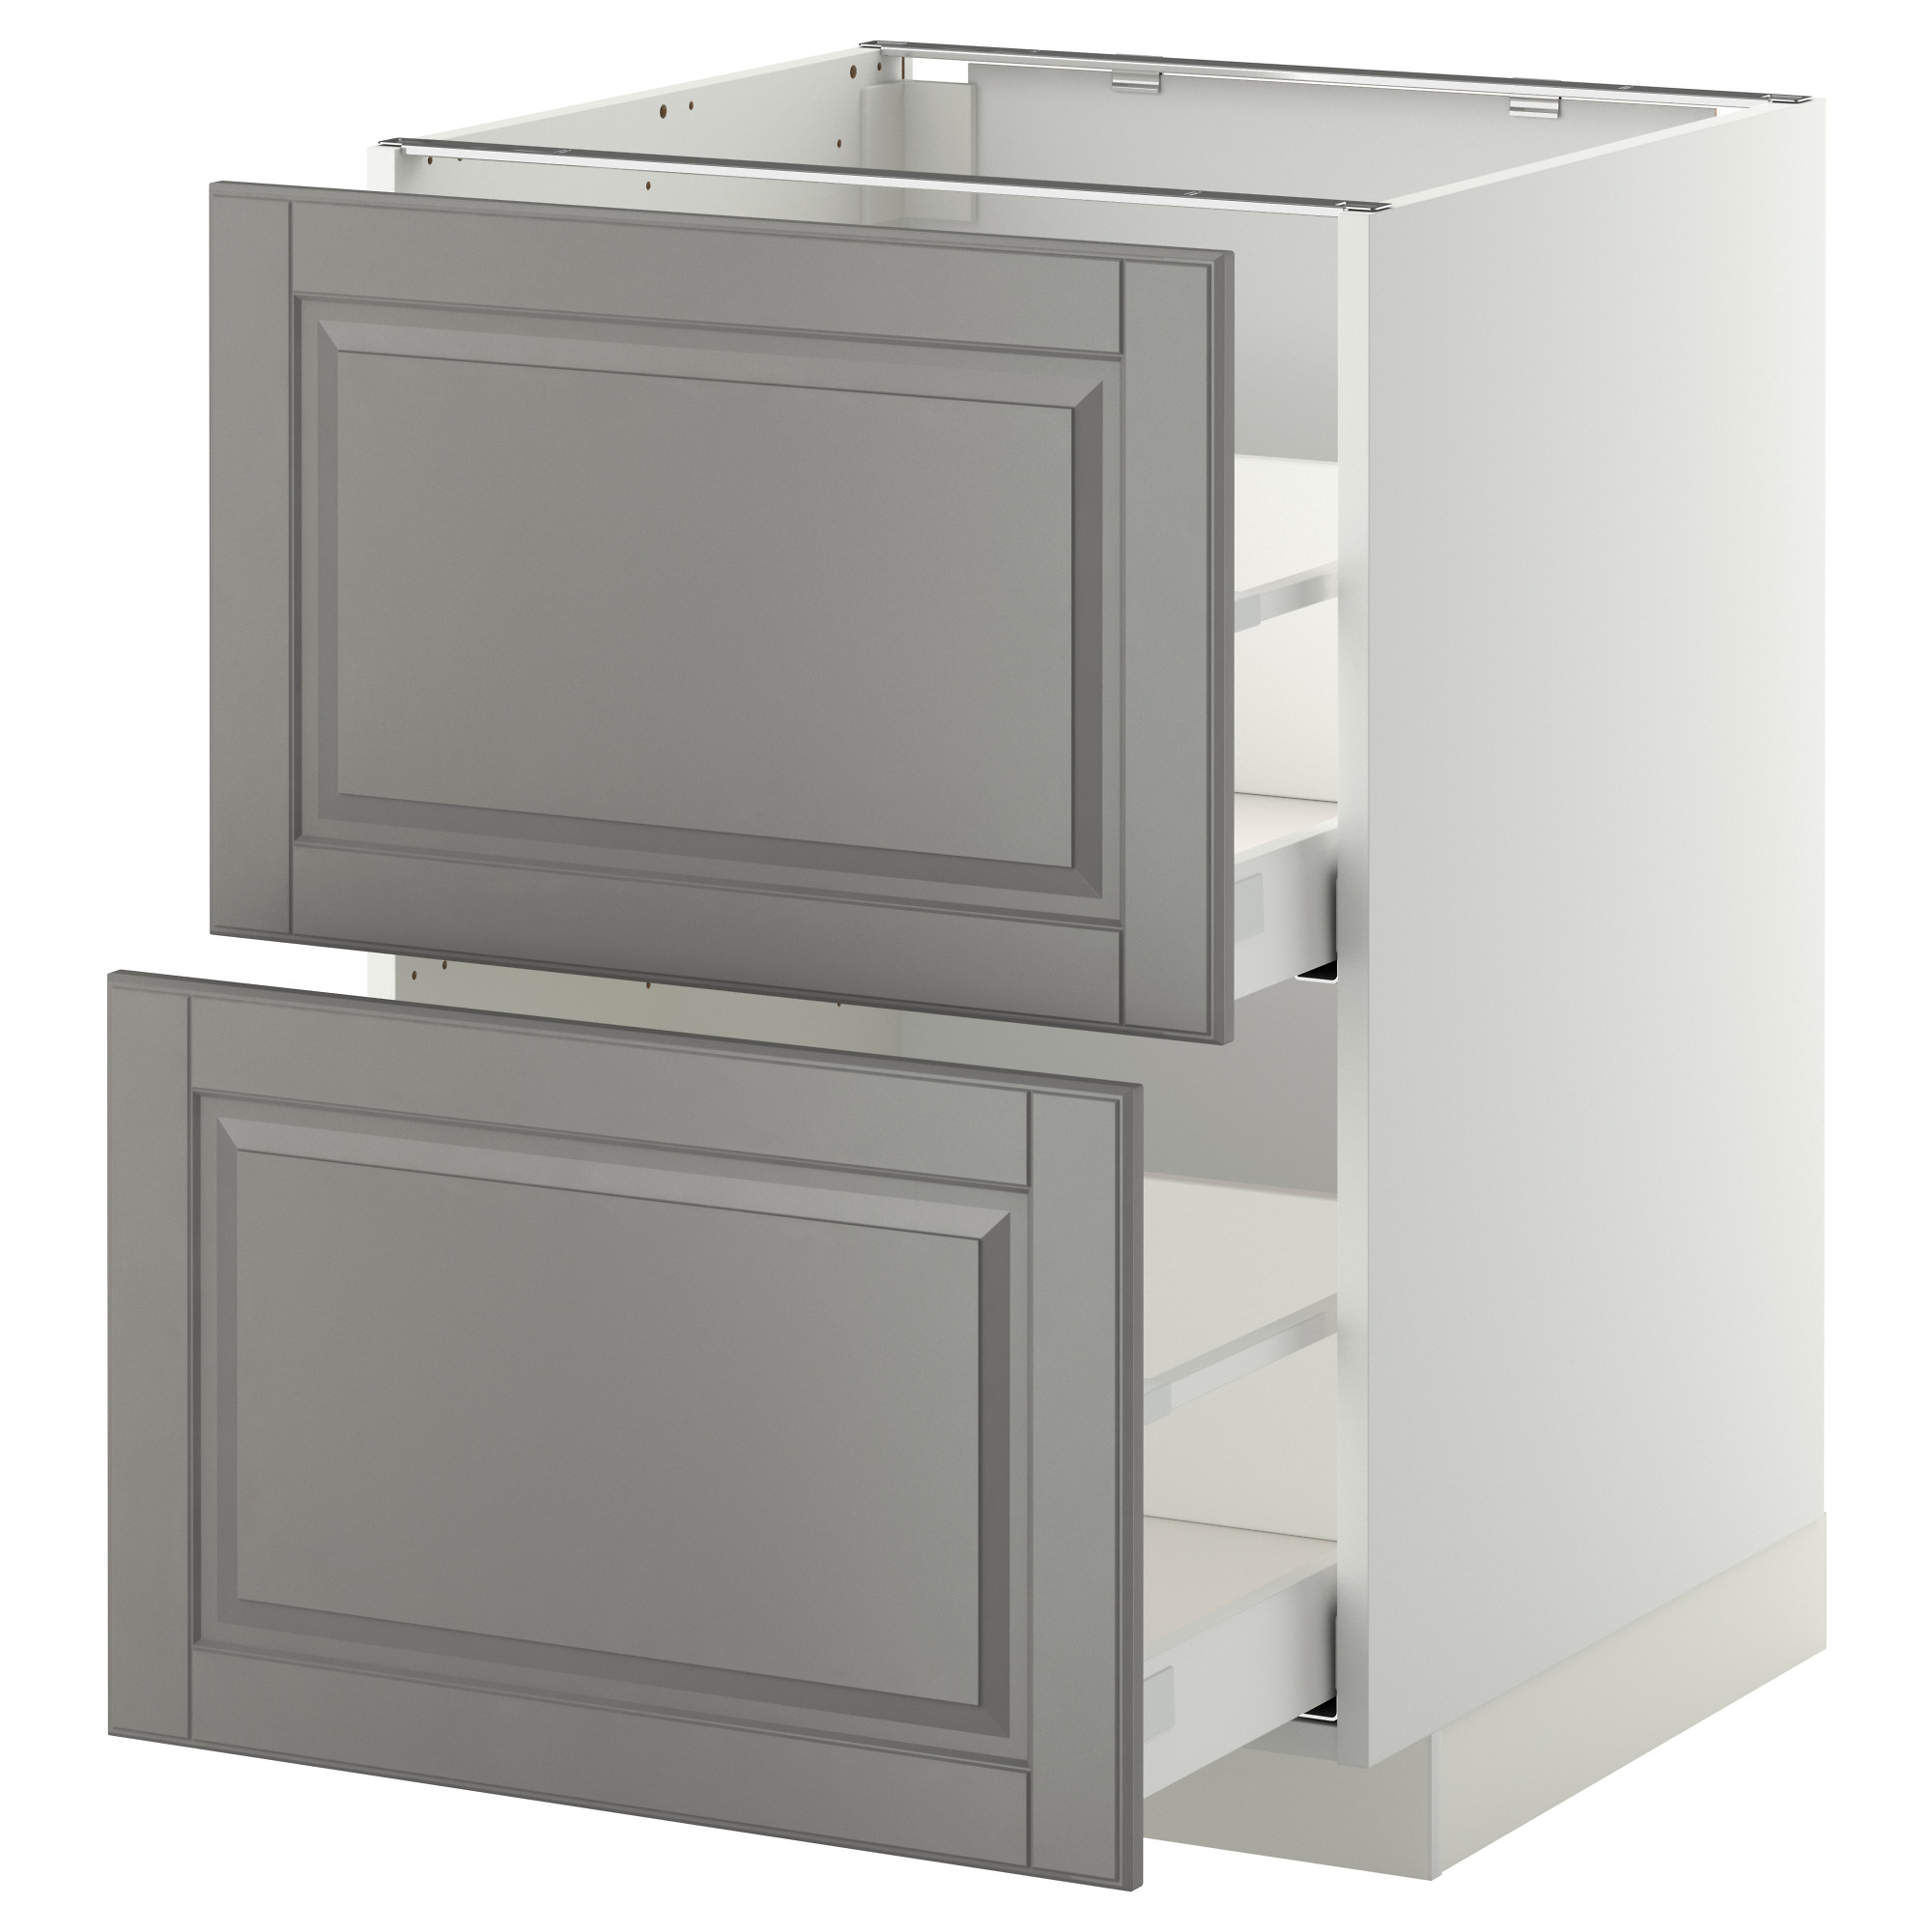 METOD base cb 2 fronts/2 high drawers